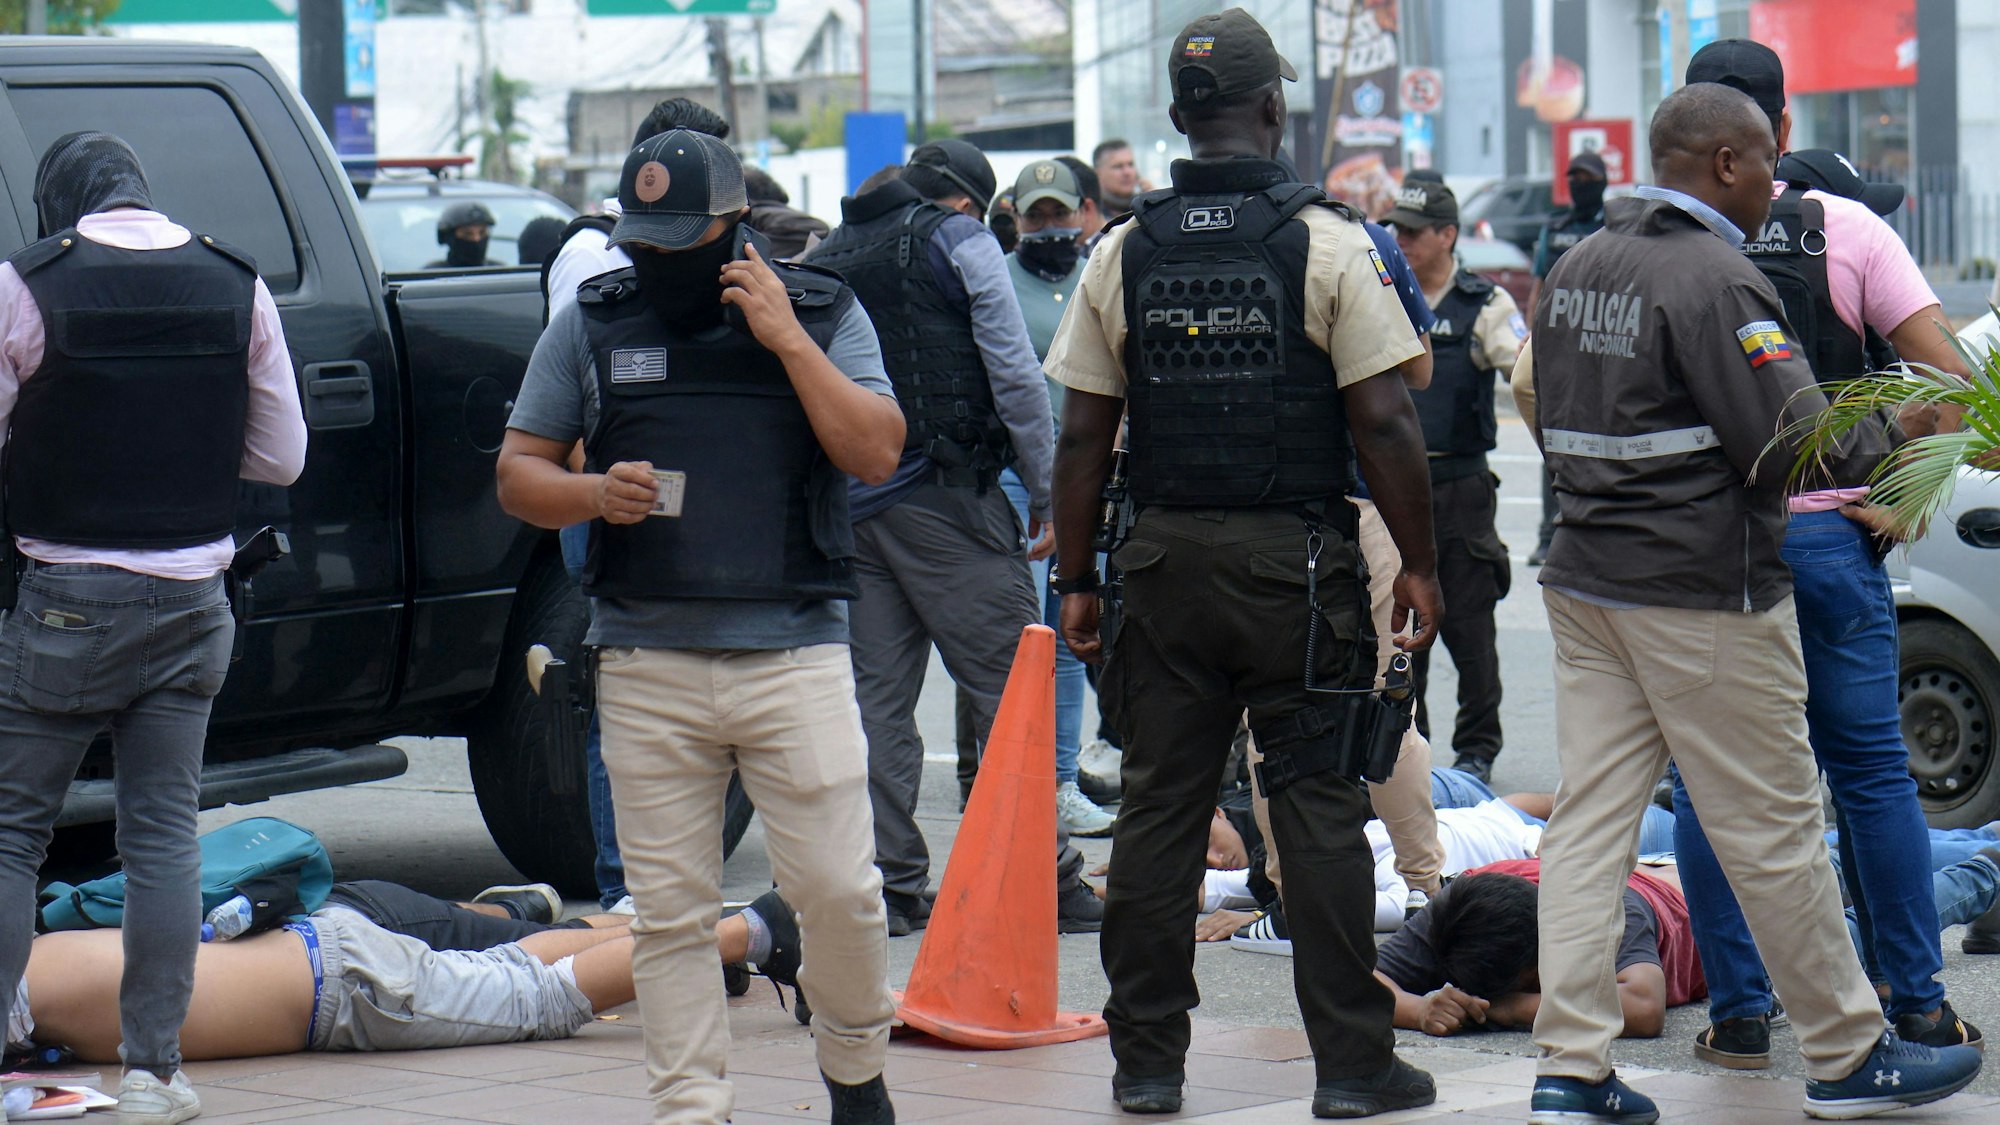 TOPSHOT - Ecuadorean police officers fuard the arrested suspects outside Ecuador's TC television channel after unidentified gunmen burst into the state-owned television studio live on air on January 9, 2024, in Guayaquil, Ecuador, a day after Ecuadorean President Daniel Noboa declared a state of emergency following the escape from prison of a dangerous narco boss. Gunshots rang out on live TV in violence-torn Ecuador as armed men carrying rifles and grenades stormed the studio shortly after gangsters vowed a "war" against the president's plans to reclaim control from "narcoterrorists". (Photo by STRINGER / AFP)